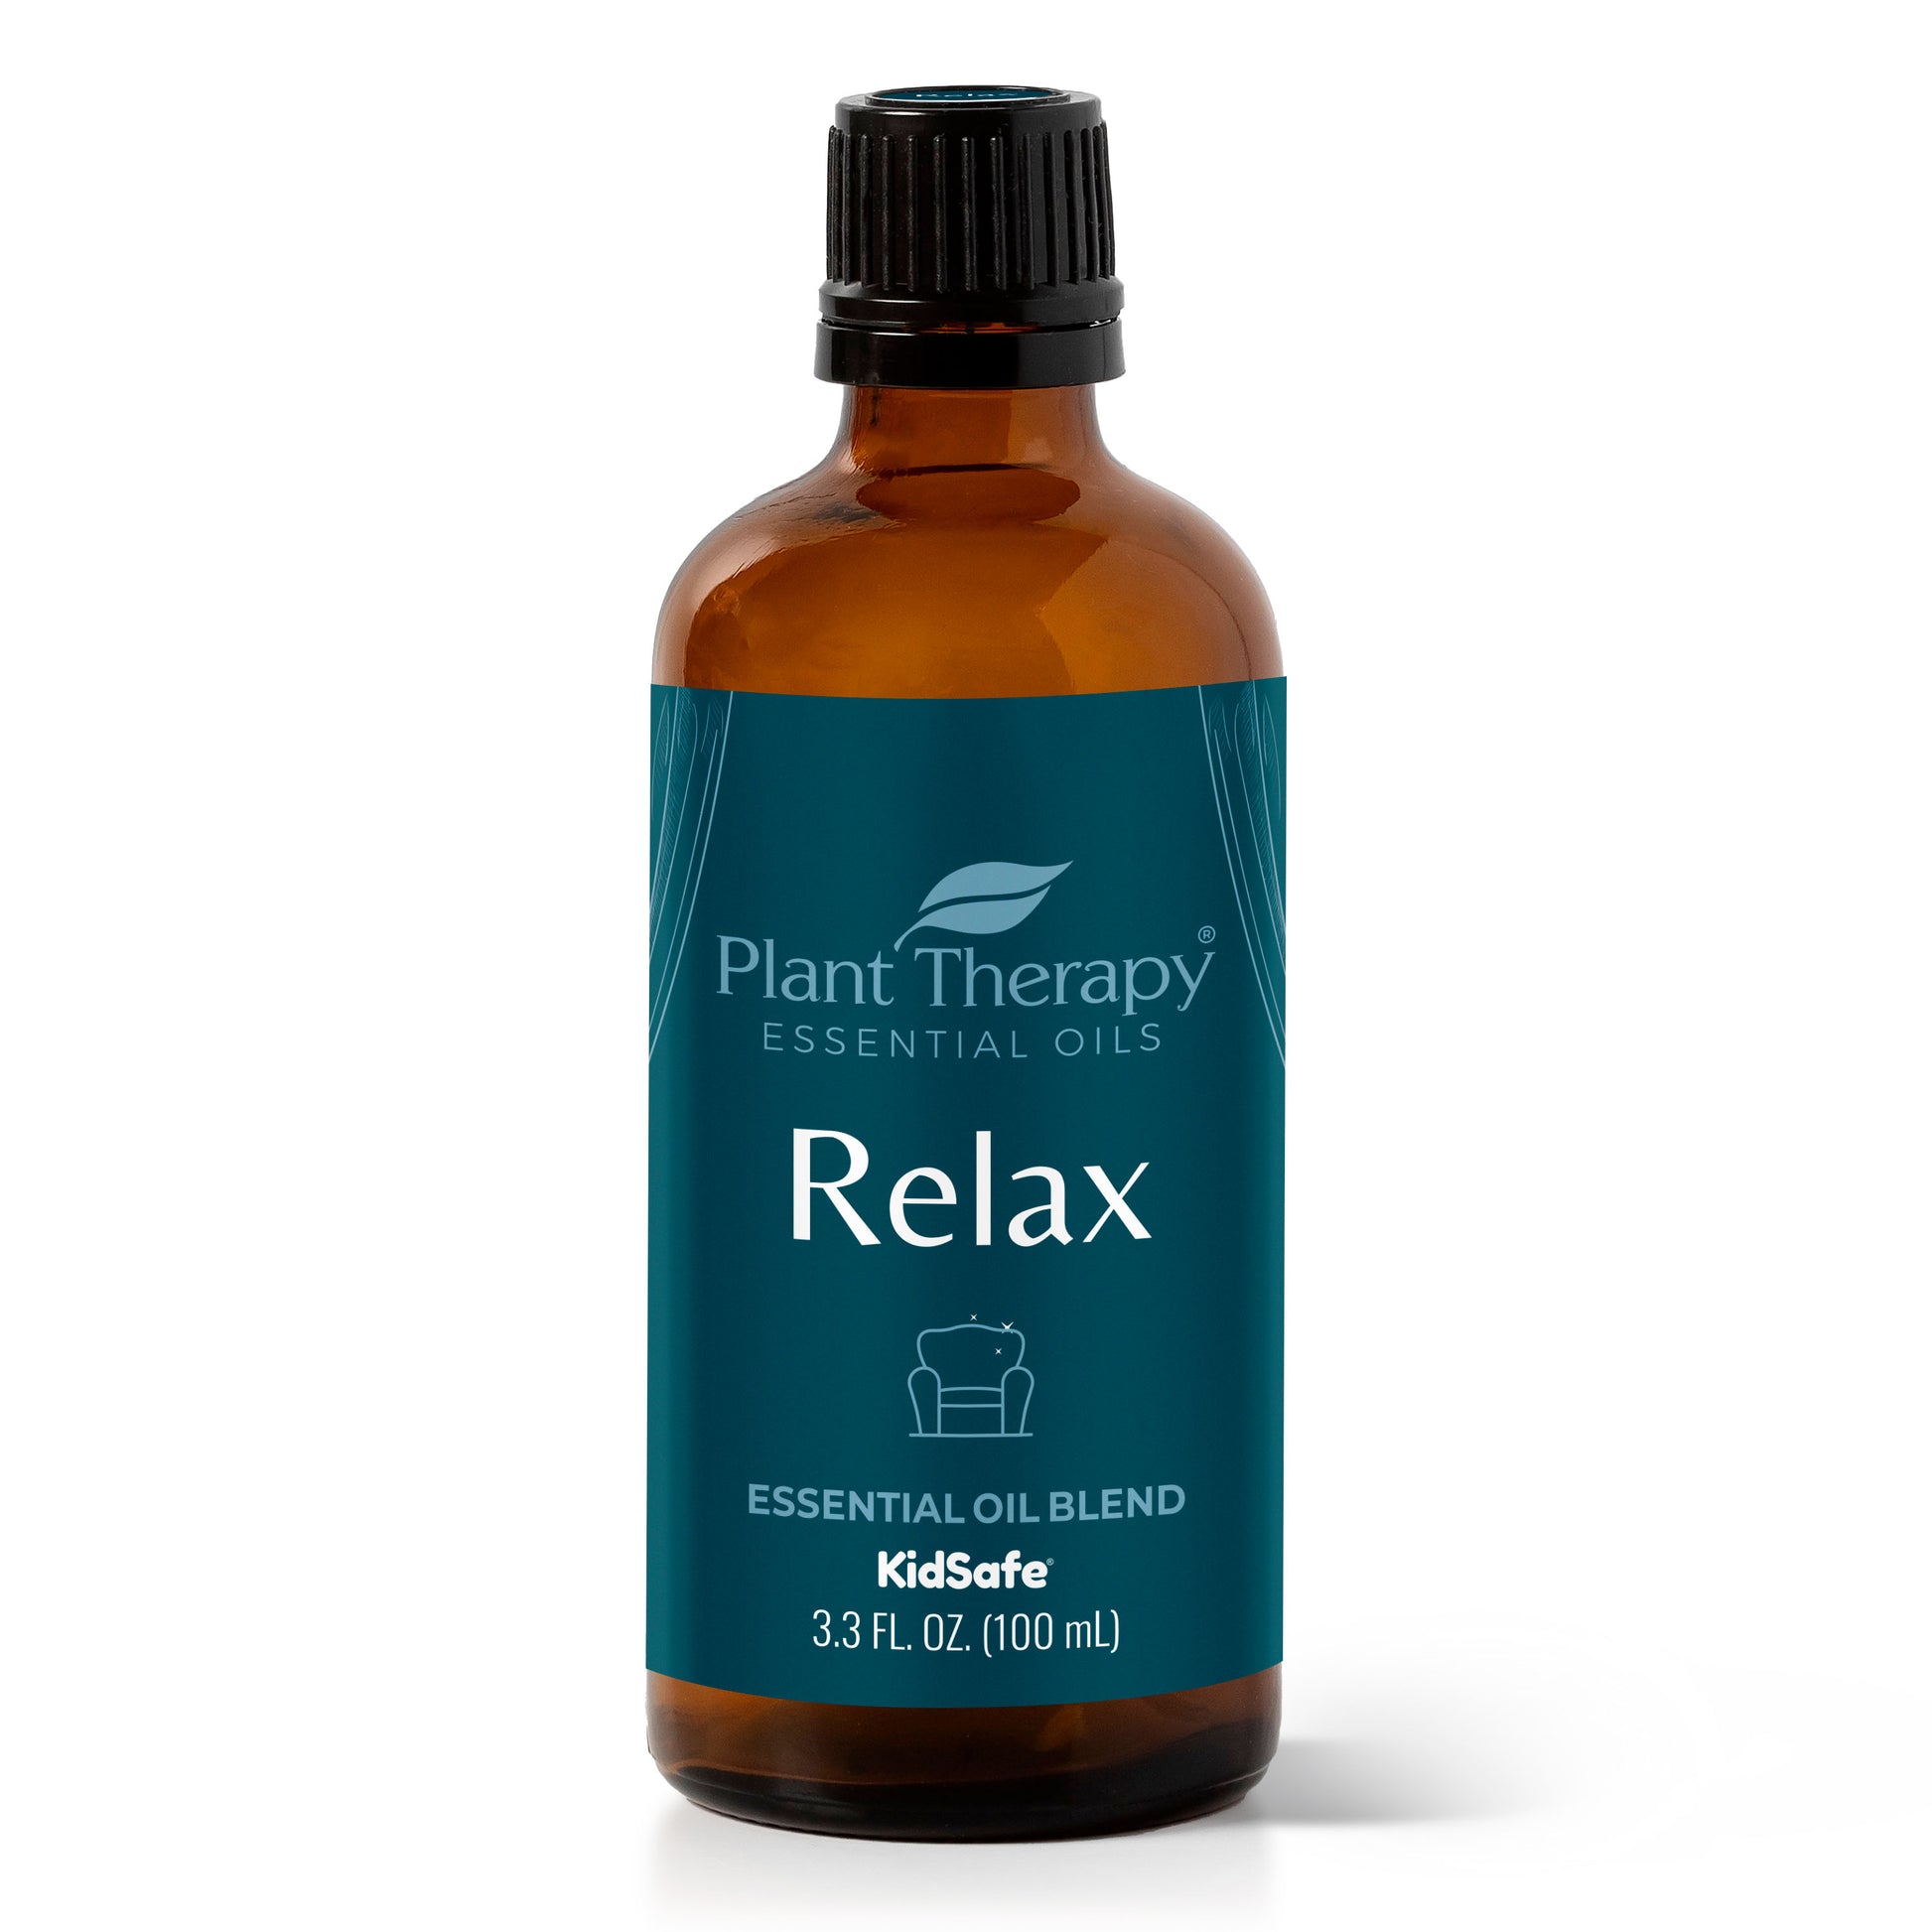 Plant Therapy Worry Free Blend